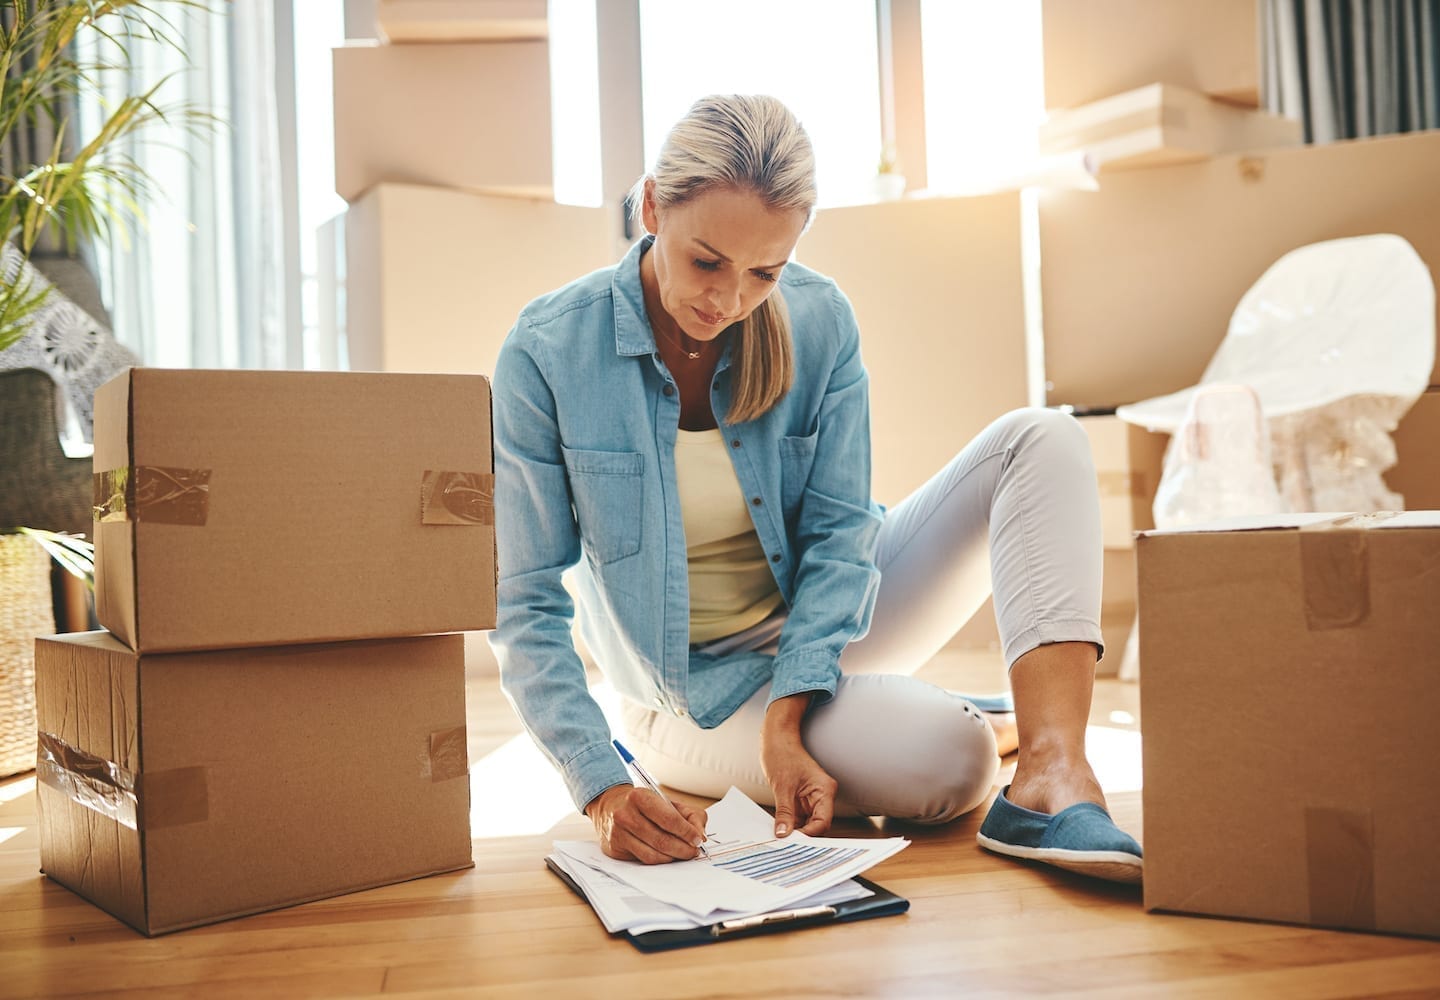 Follow These 4 Tips For An Easier House Move